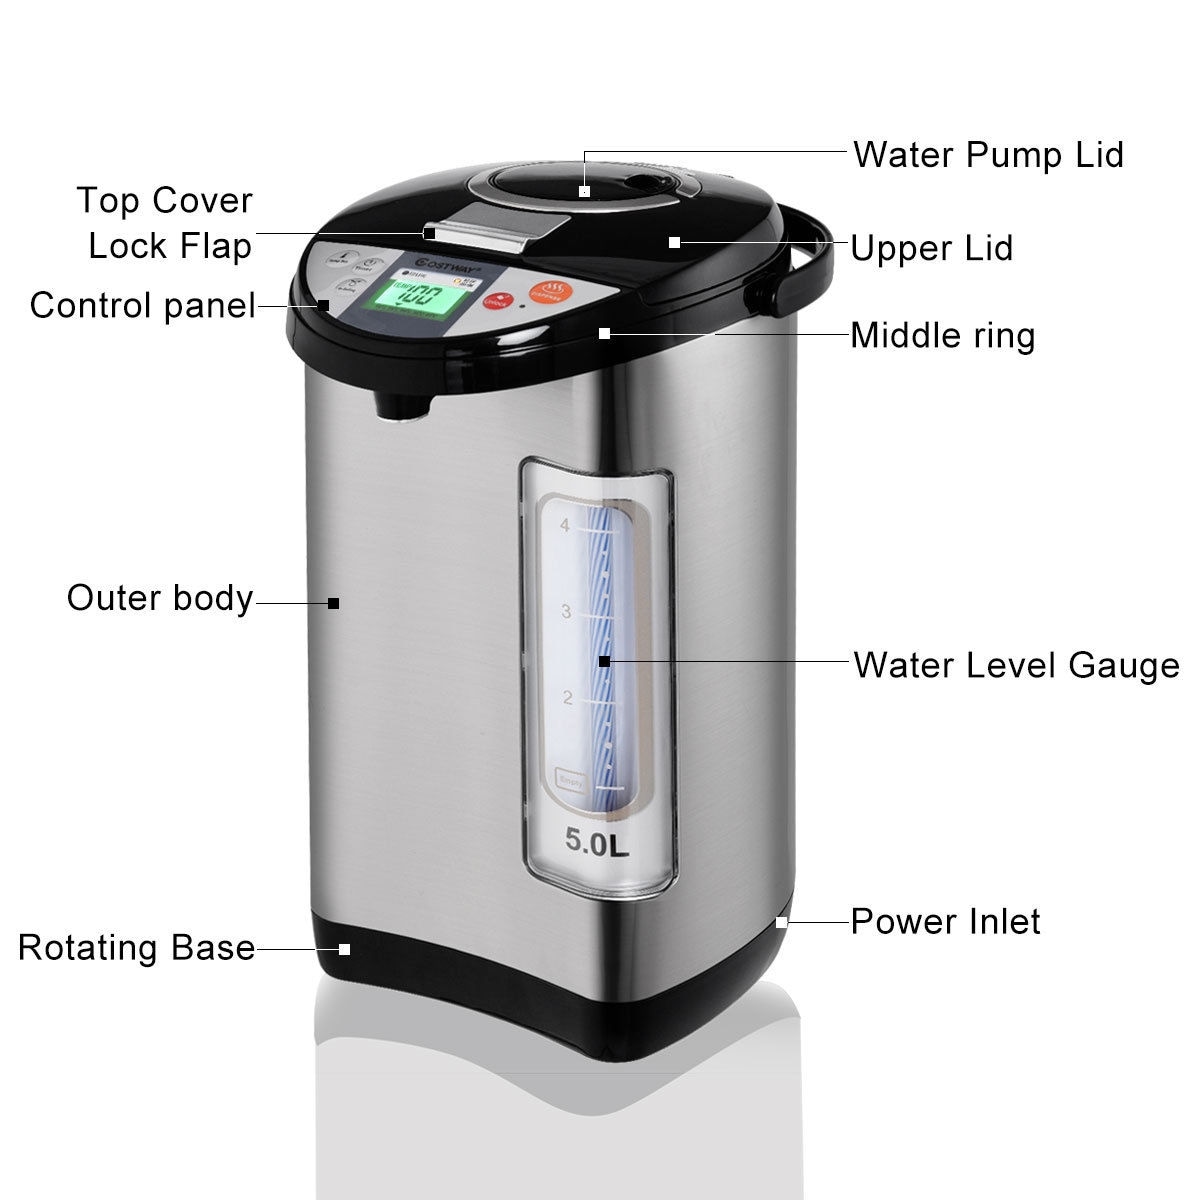 https://ak1.ostkcdn.com/images/products/is/images/direct/9bbef9e389e3723325d301dcd3df55cf8db2e473/Costway-5-Liter-LCD-Water-Boiler-and-Warmer-Electric-Hot-Pot-Kettle-Hot-Water-Dispenser.jpg